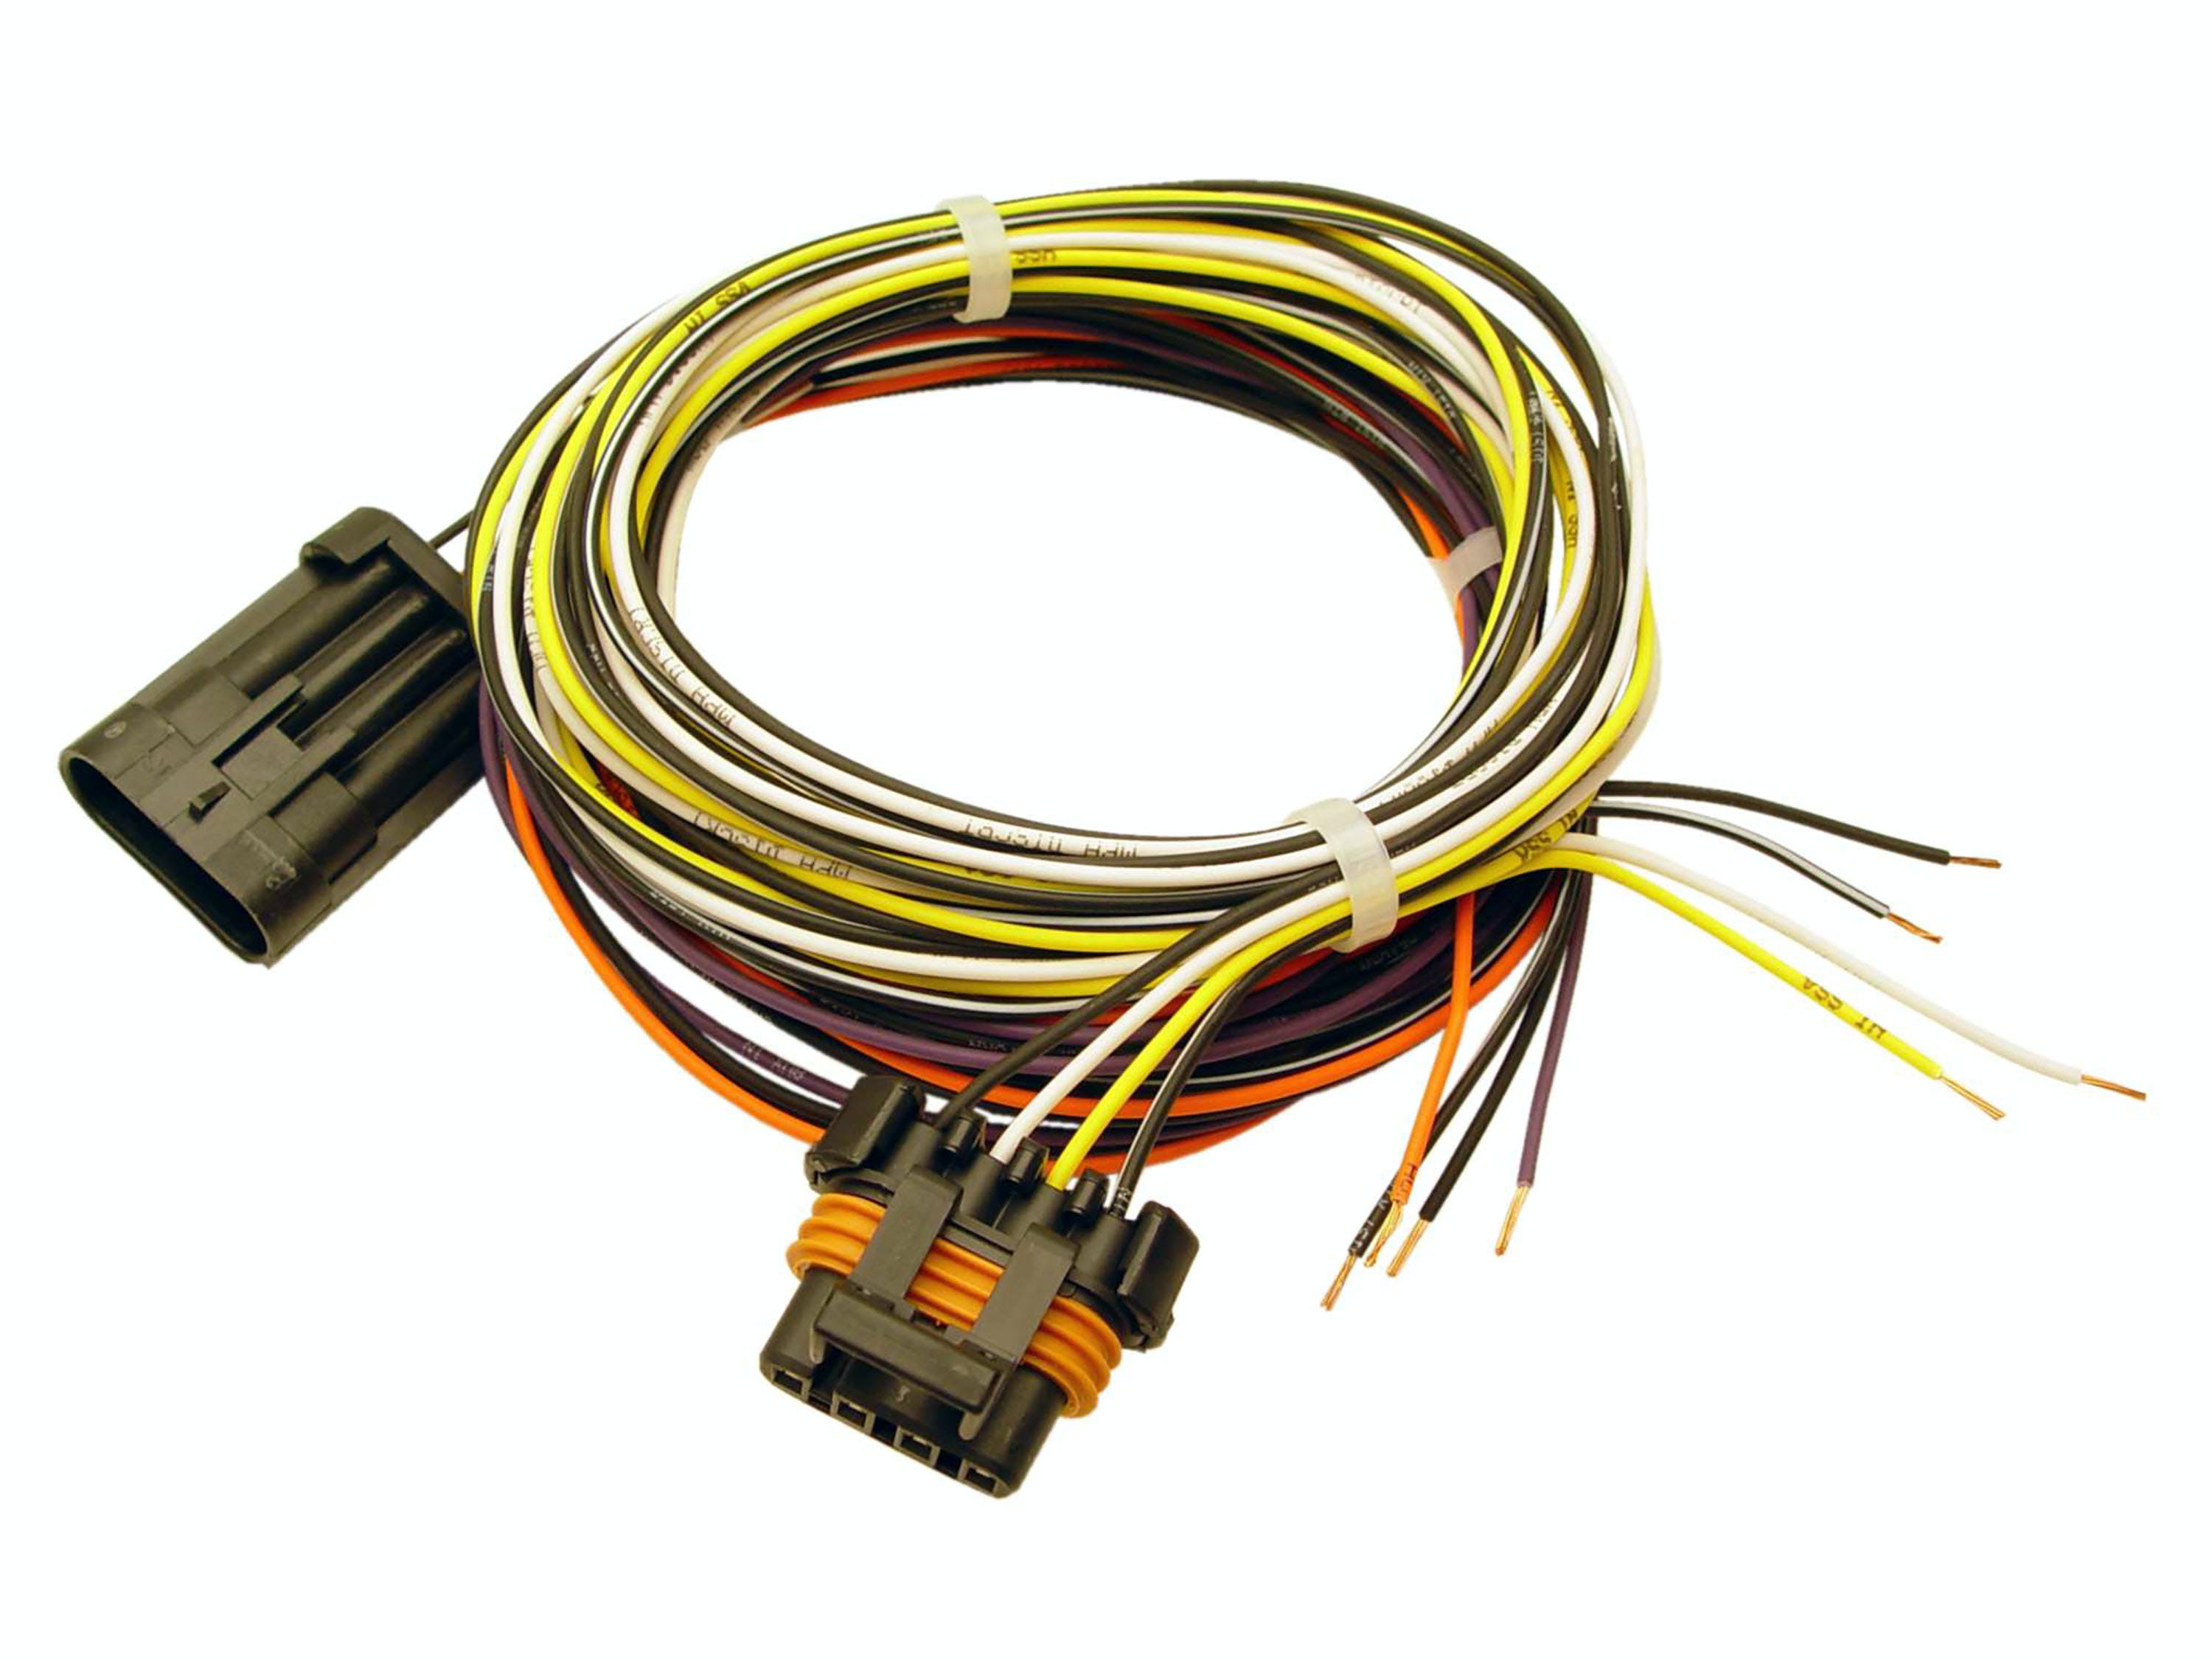 FAST - Fuel Air Spark Technology 301403 VSS Harness